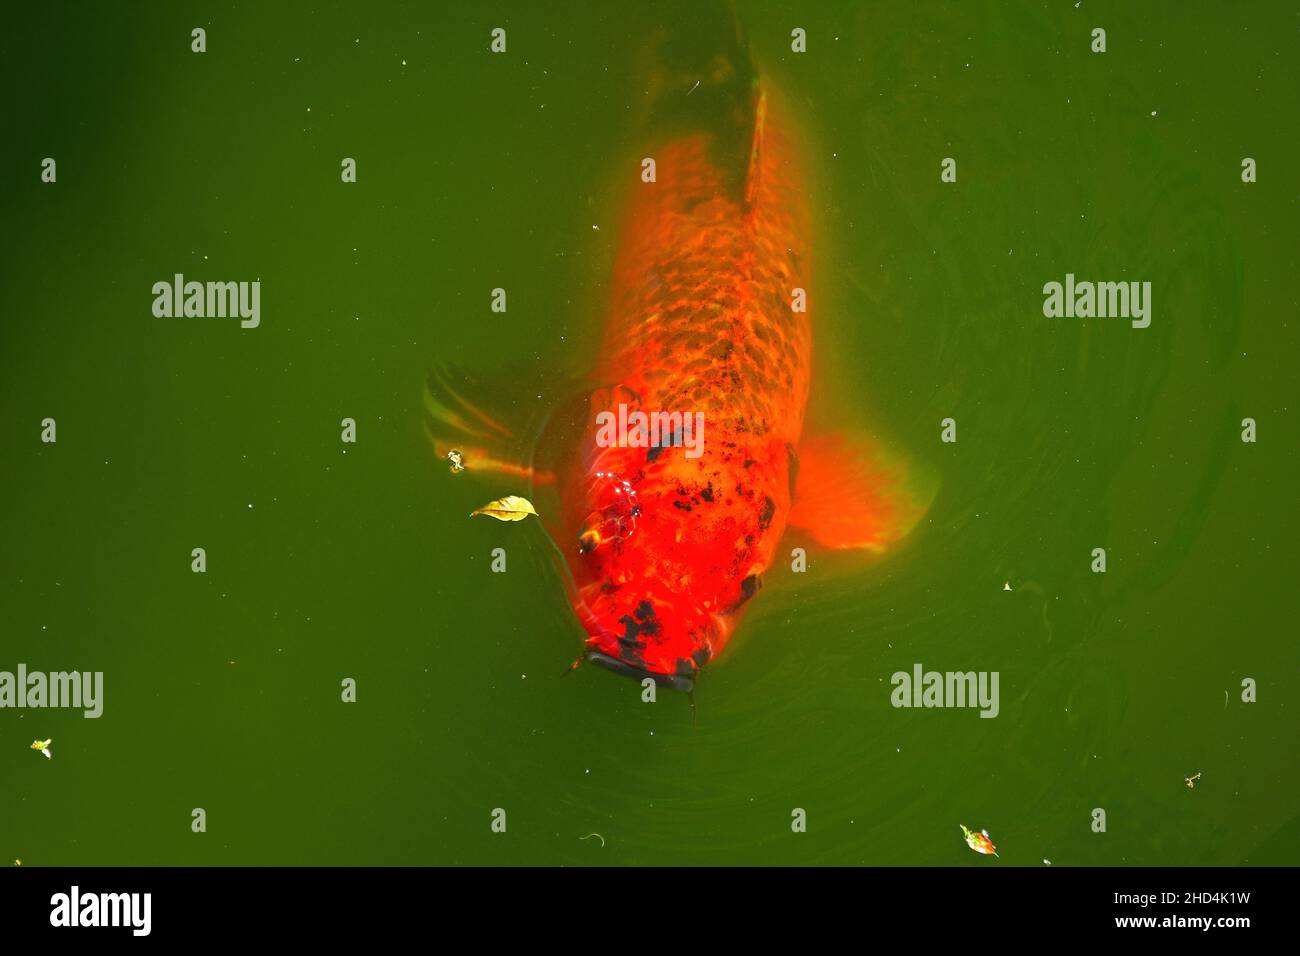 Koi fish in a green pond Stock Photo